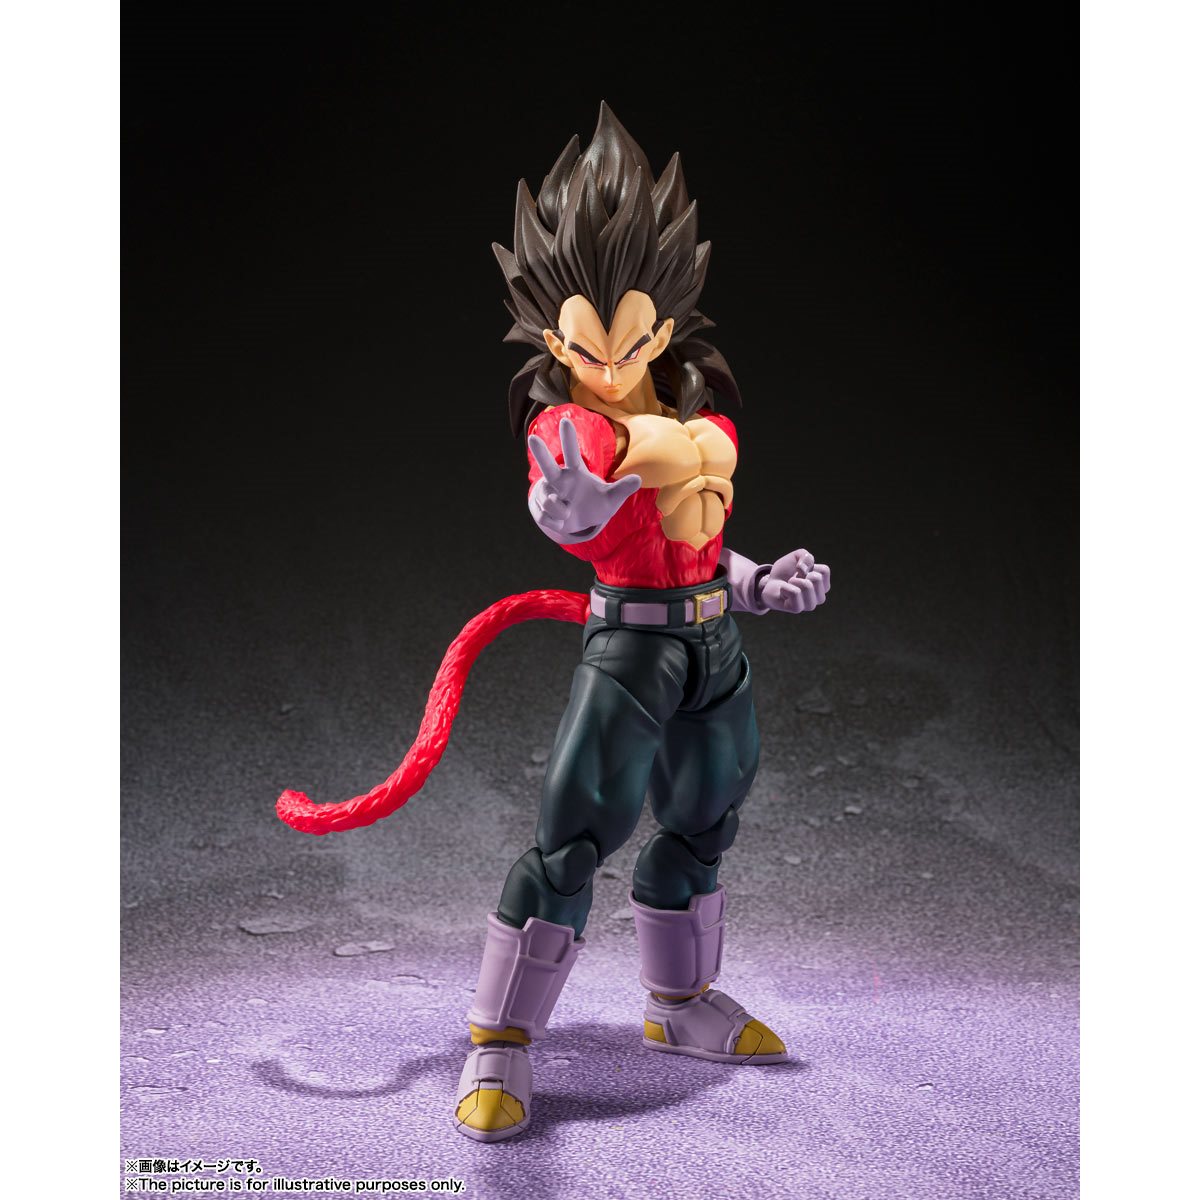 A highly articulated Super Saiyan 4 Vegeta figure from Dragon Ball GT, standing under 6 inches tall. Comes with three face plates, five pairs of interchangeable hands, a tail, and an energy blast effect.